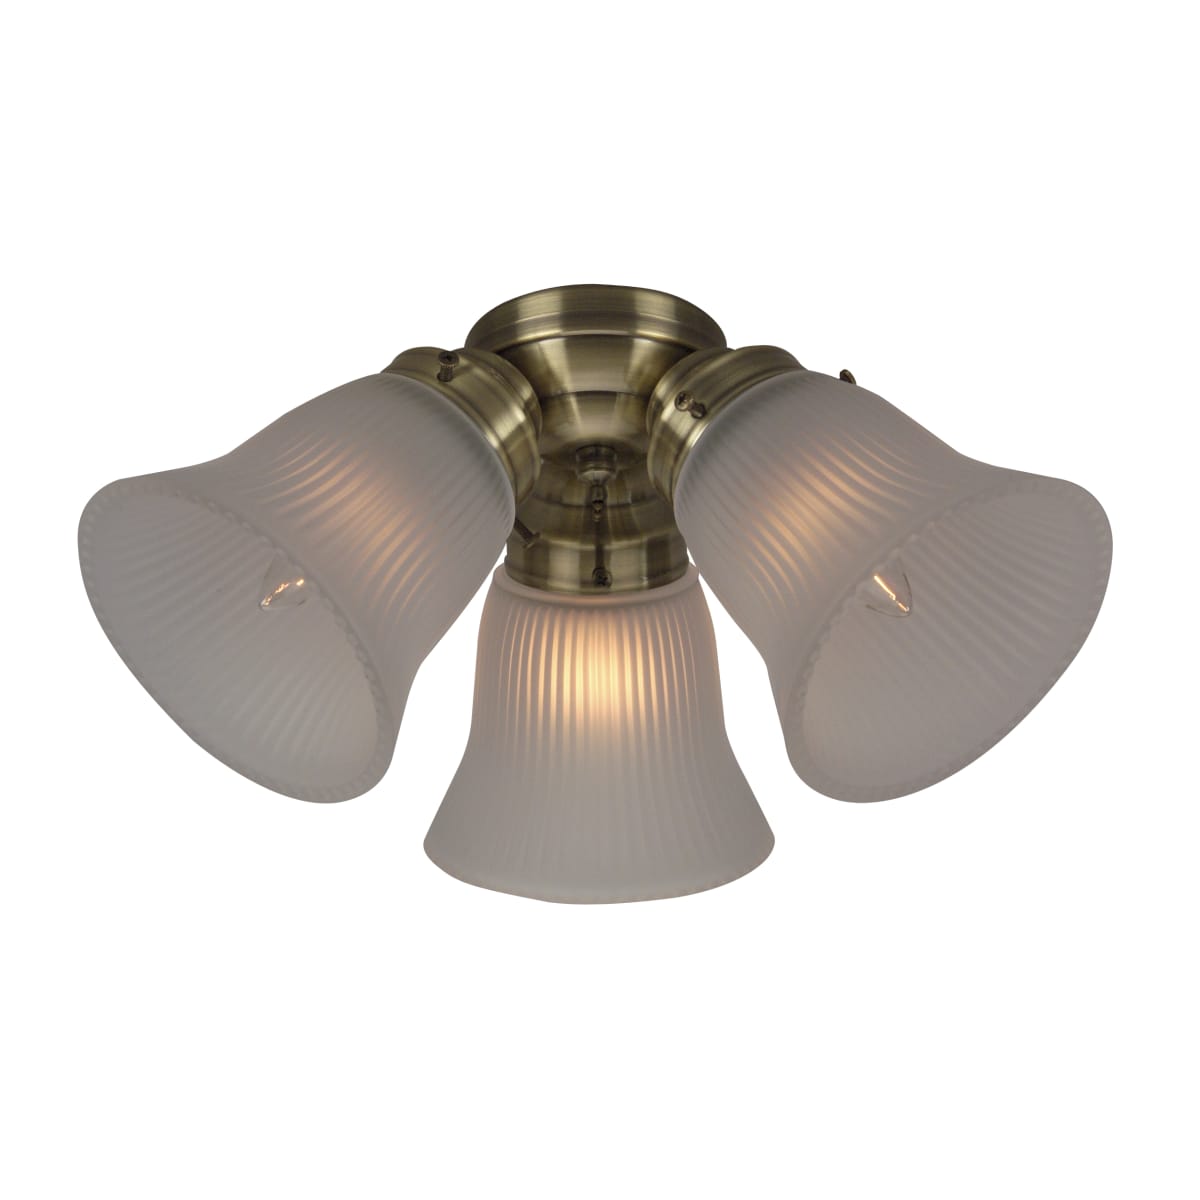 Craftmade F300cfl Ag Universal 3 Light, Are Light Kits Universal For Ceiling Fans